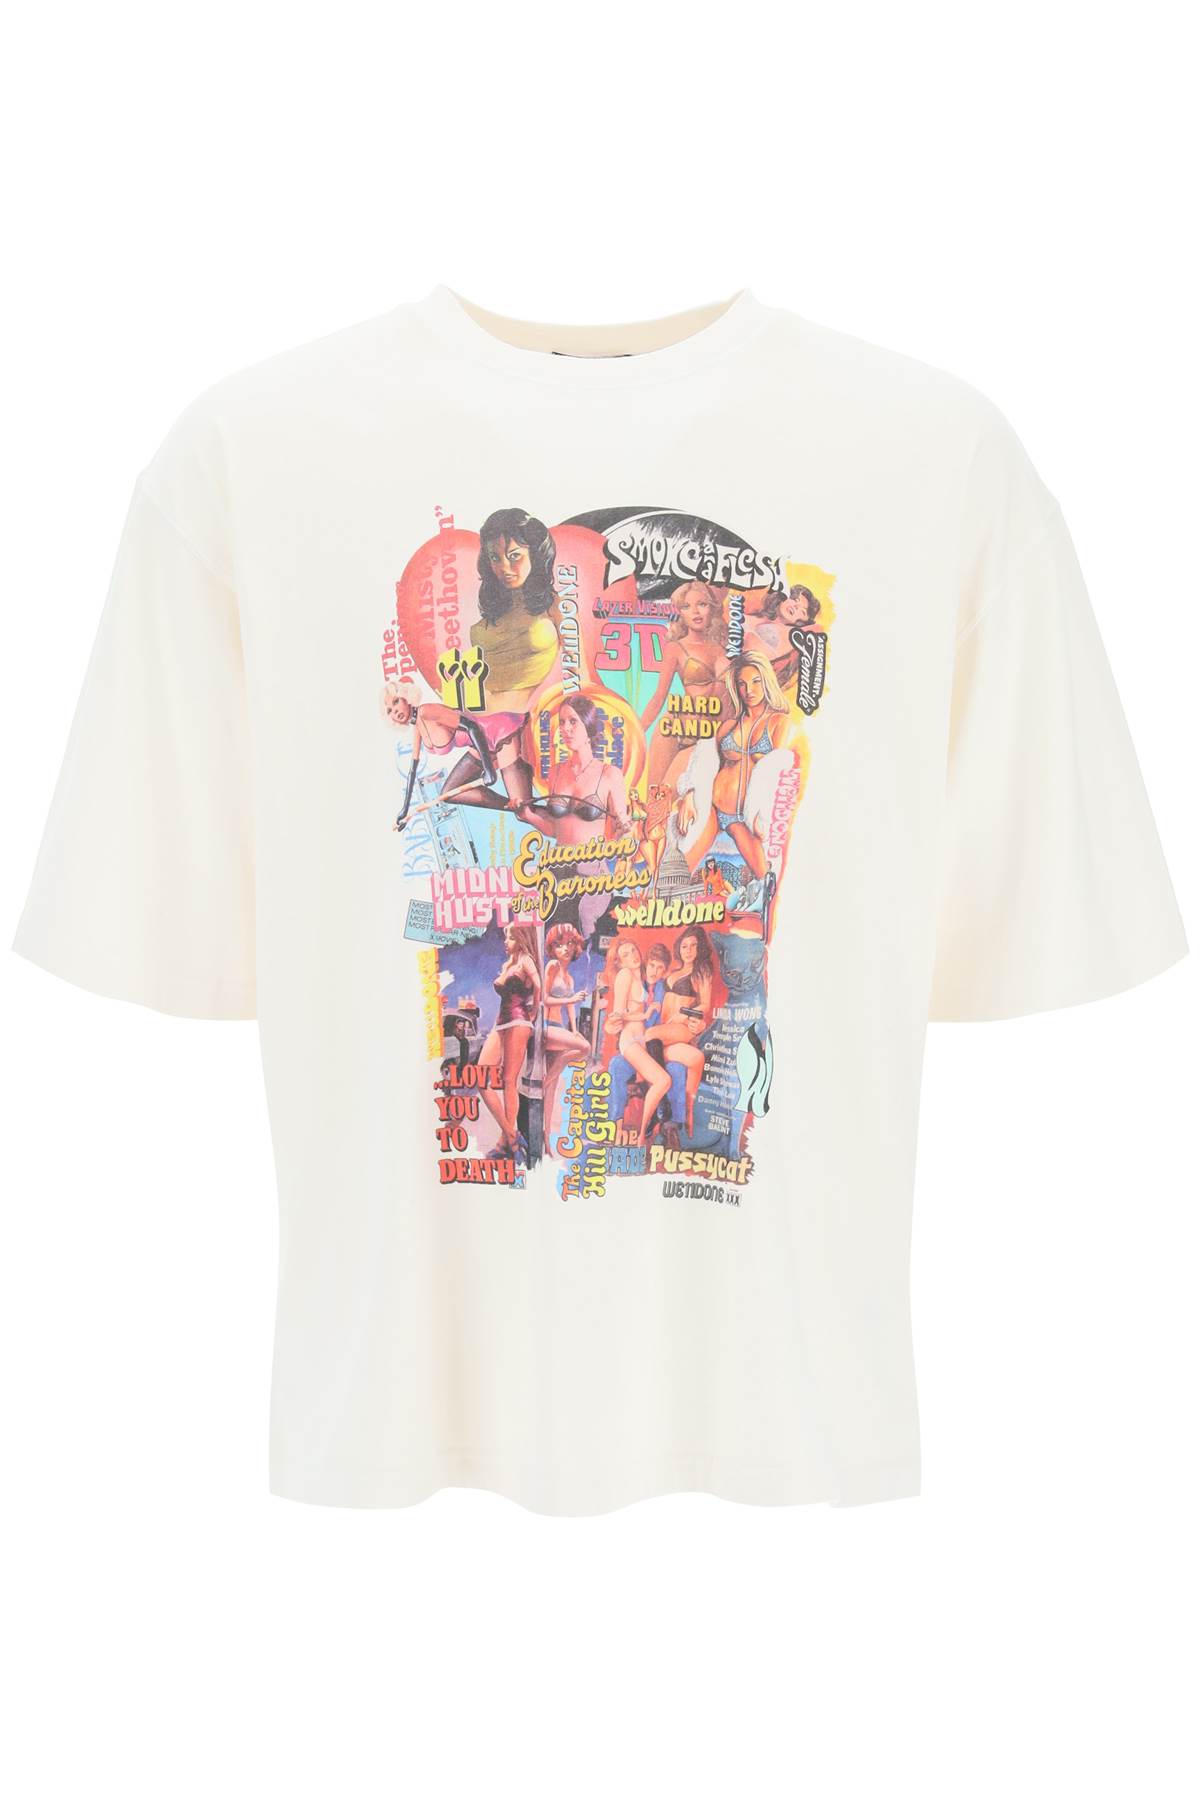 WE11 DONE new Movie Collage Print Oversized T-shirt